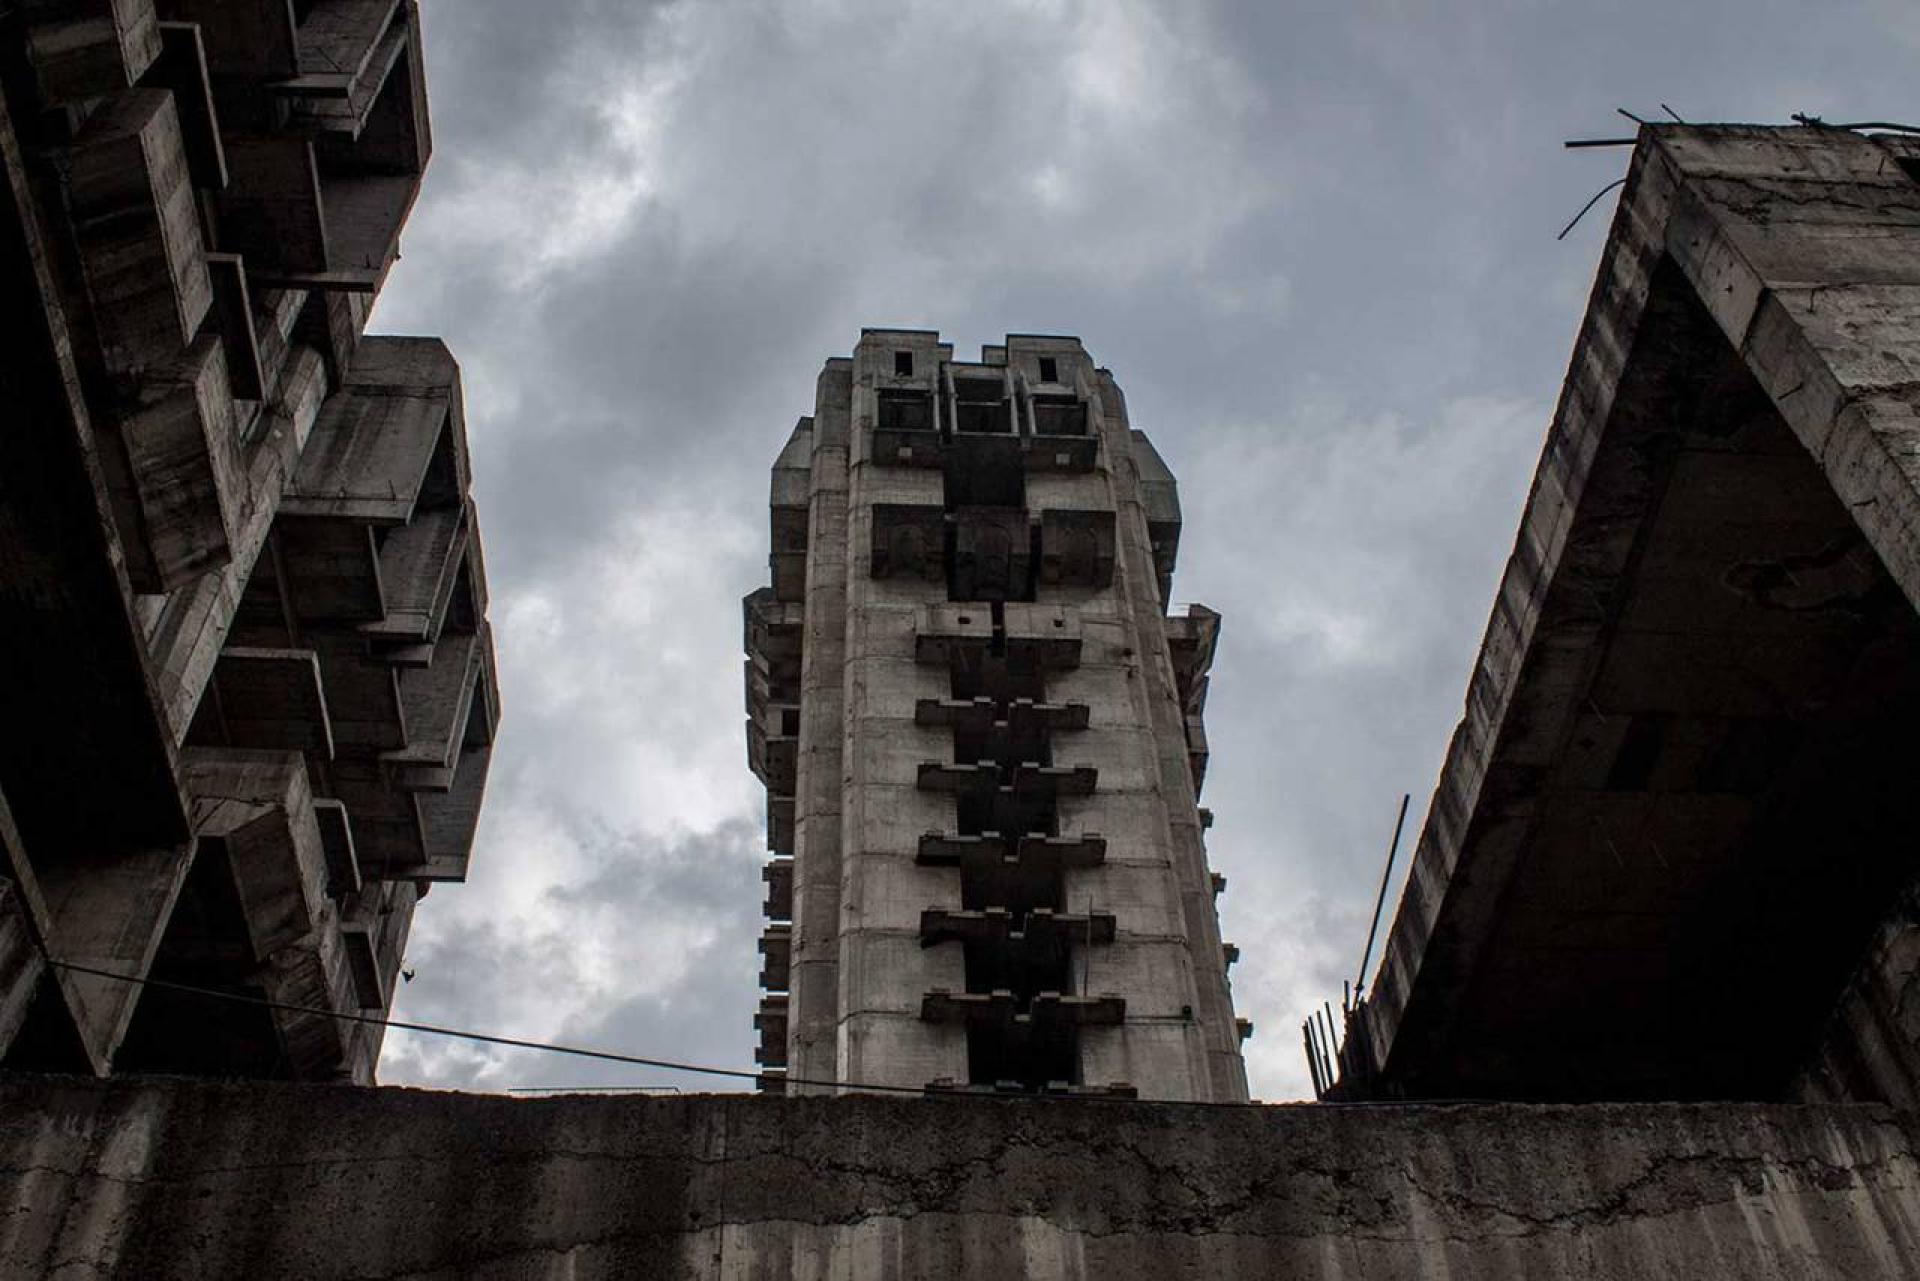 The unfinished tower. | Photo © Darmon Richter